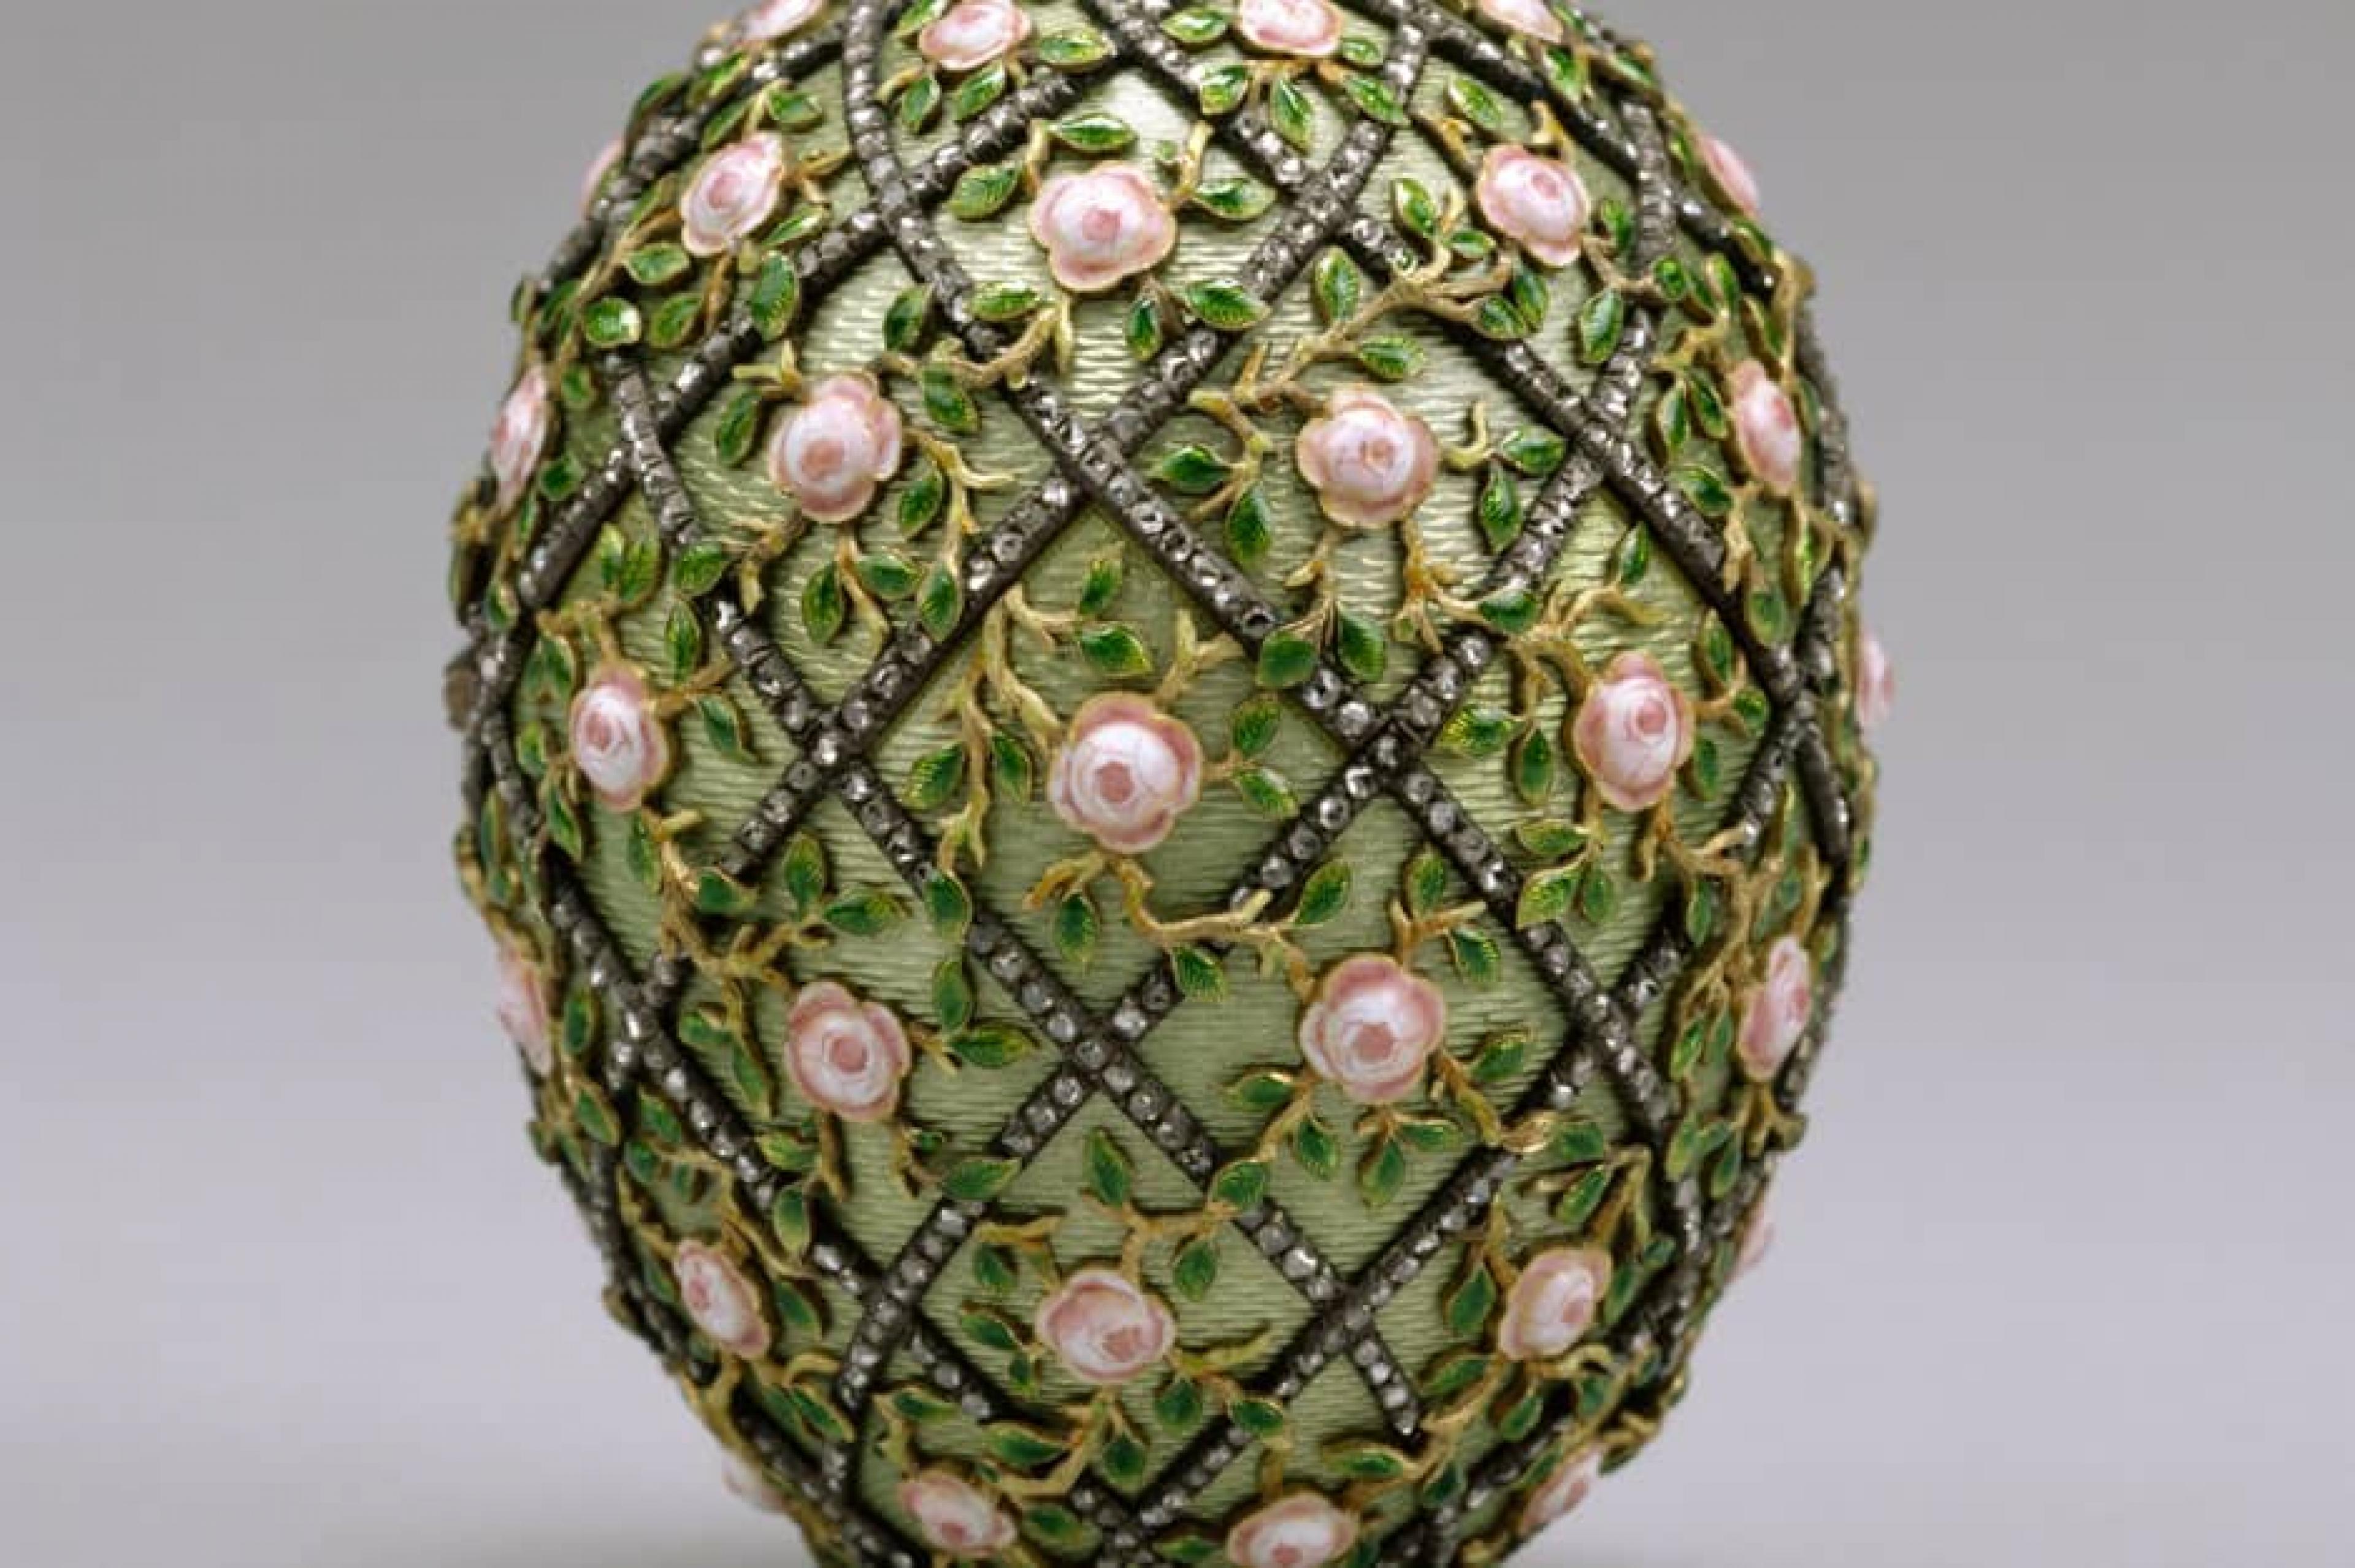 Continental Dish at Kremlin , Moscow, Russia-A Fabergé egg in the collection of the Armory